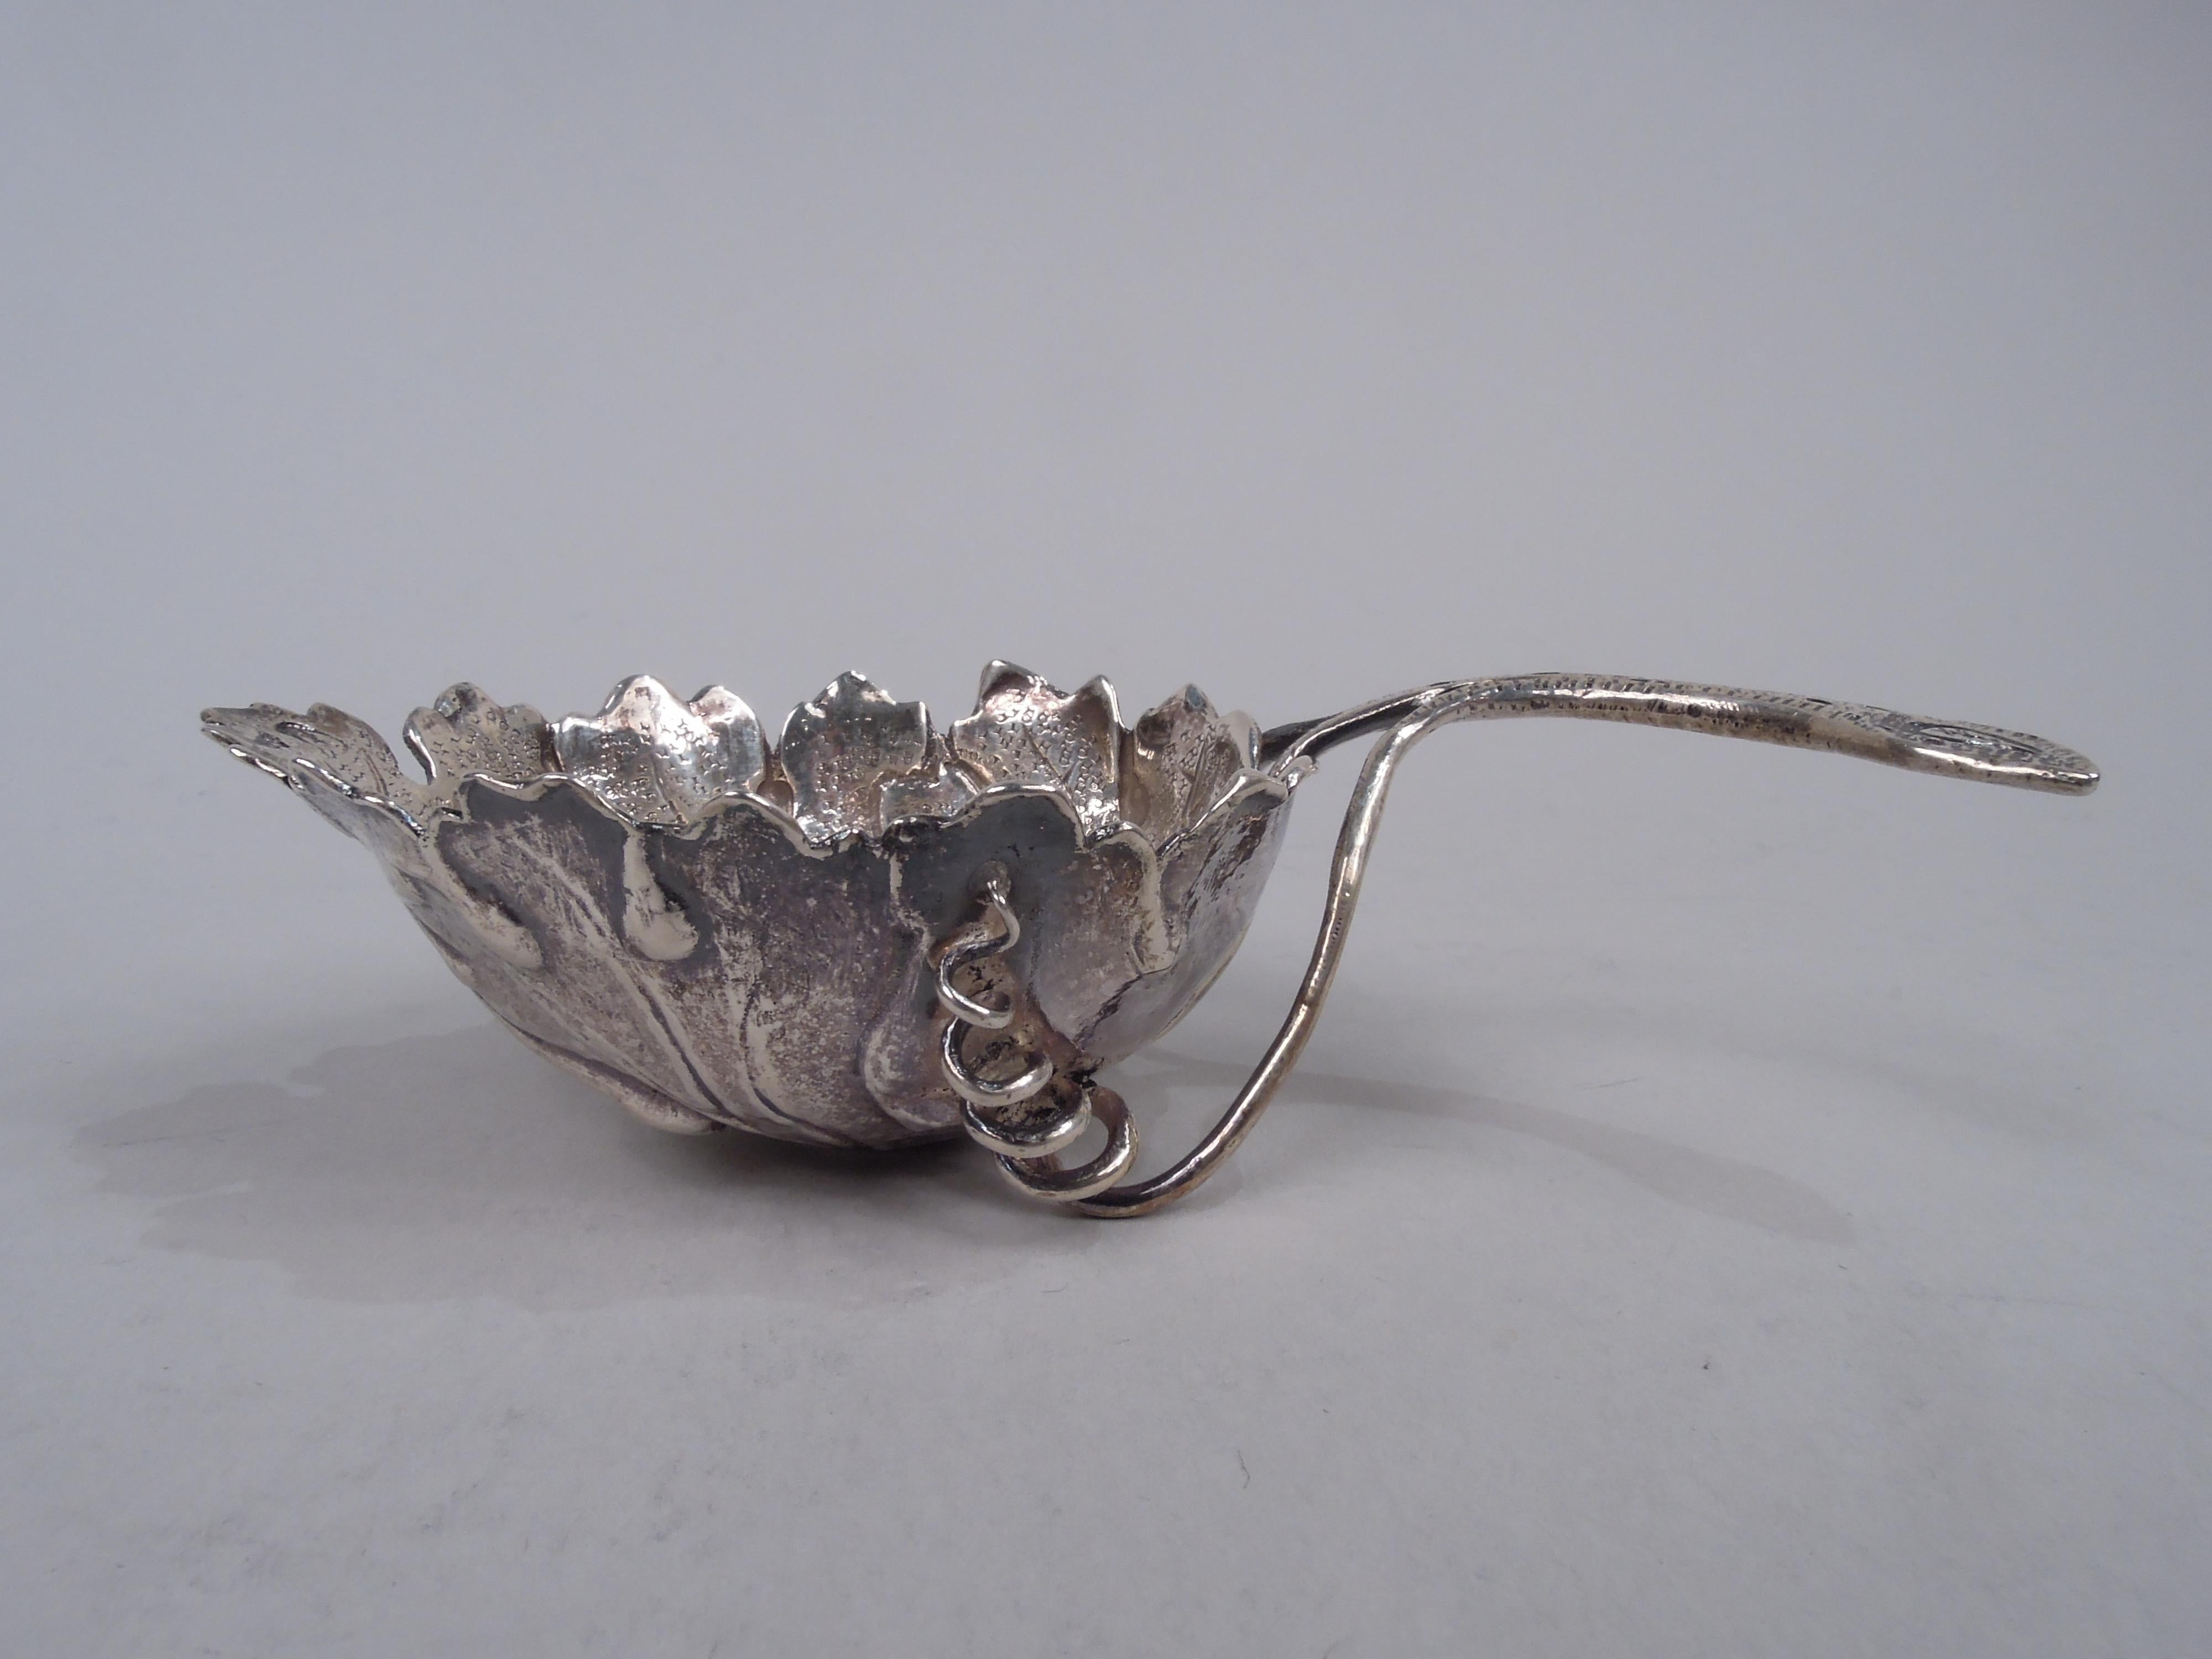 German silver tea scoop. Imported to England in 1892 by Thomas Glaser. Leaf-form bowl with veins and wispy, irregular tips. Woody stem with coiled tendril mounts. German marks and English sterling-standard import marks including London assay stamp.